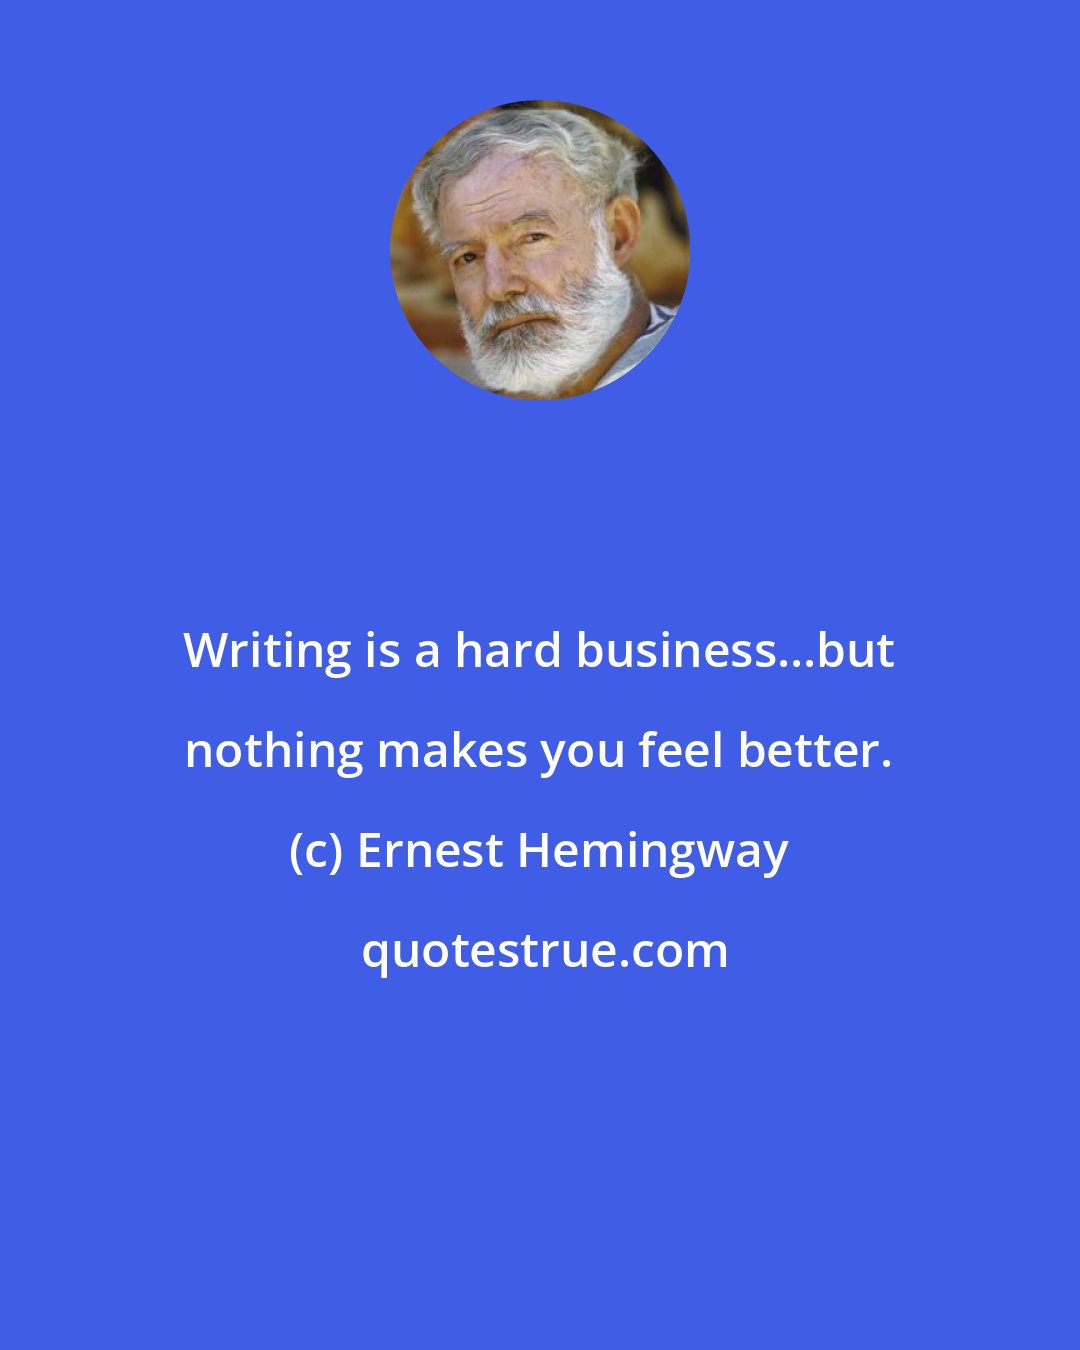 Ernest Hemingway: Writing is a hard business...but nothing makes you feel better.